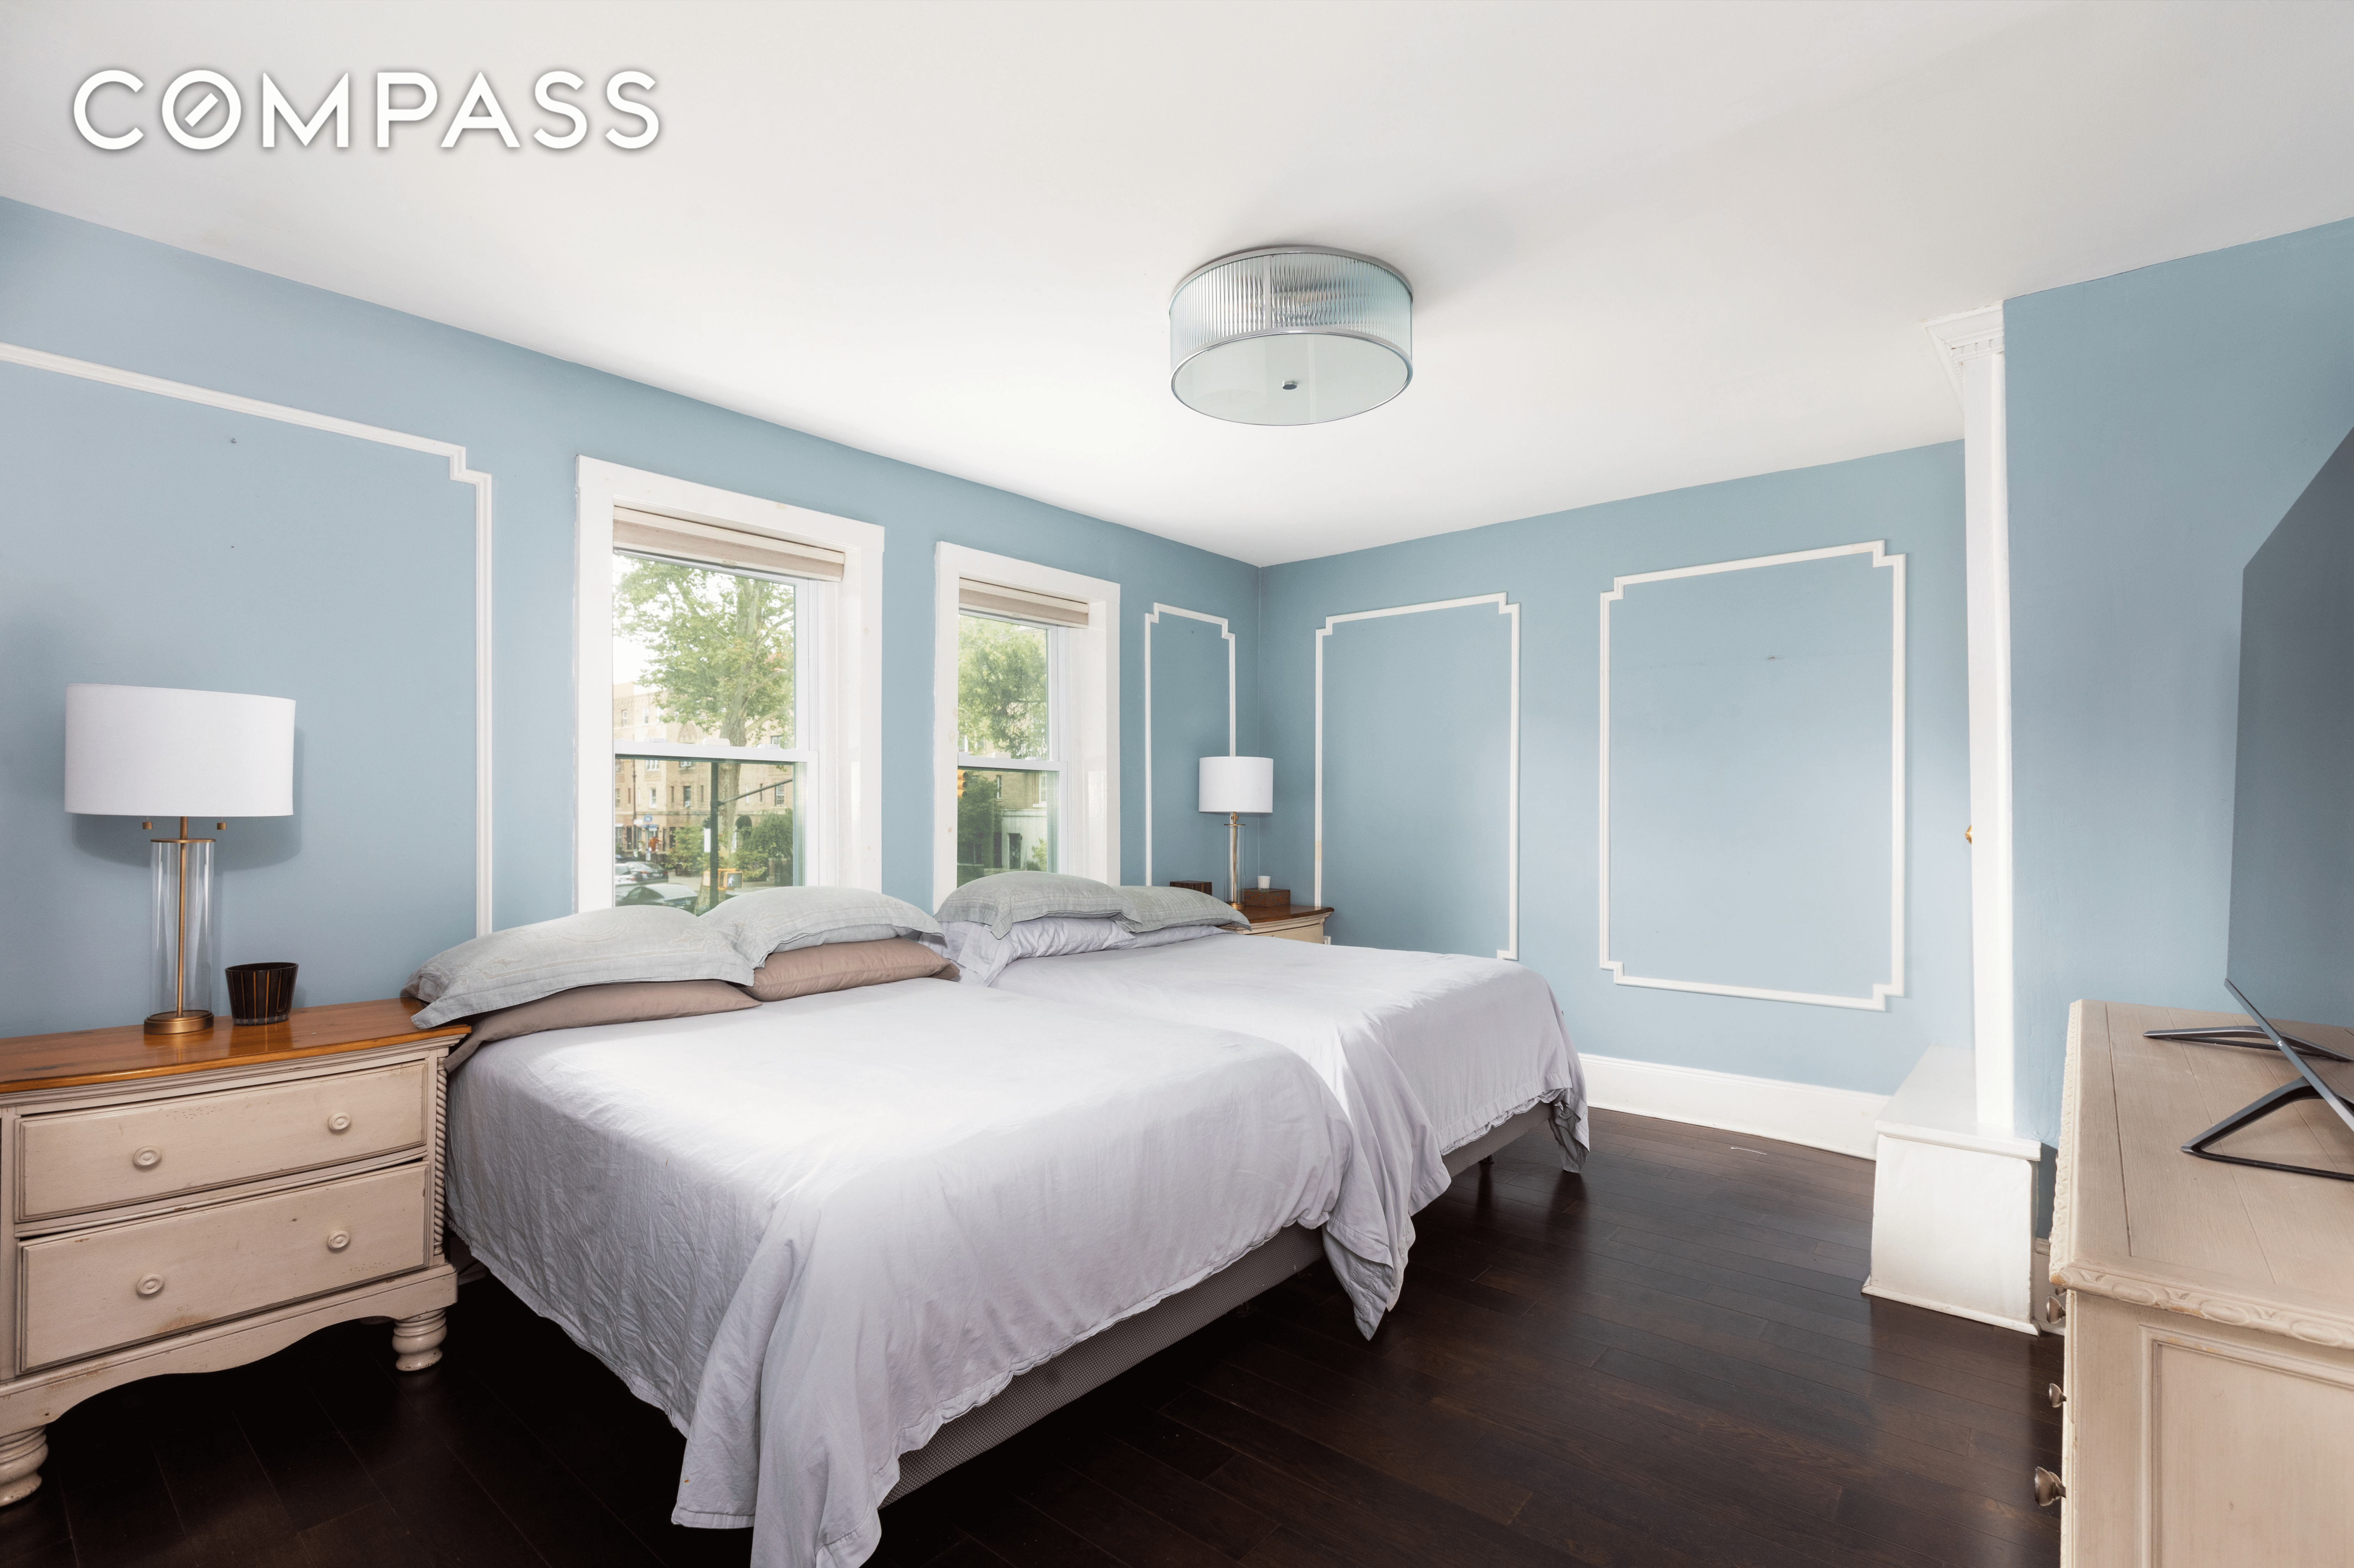 a bedroom with wall moldings and large enough to fit two full beds